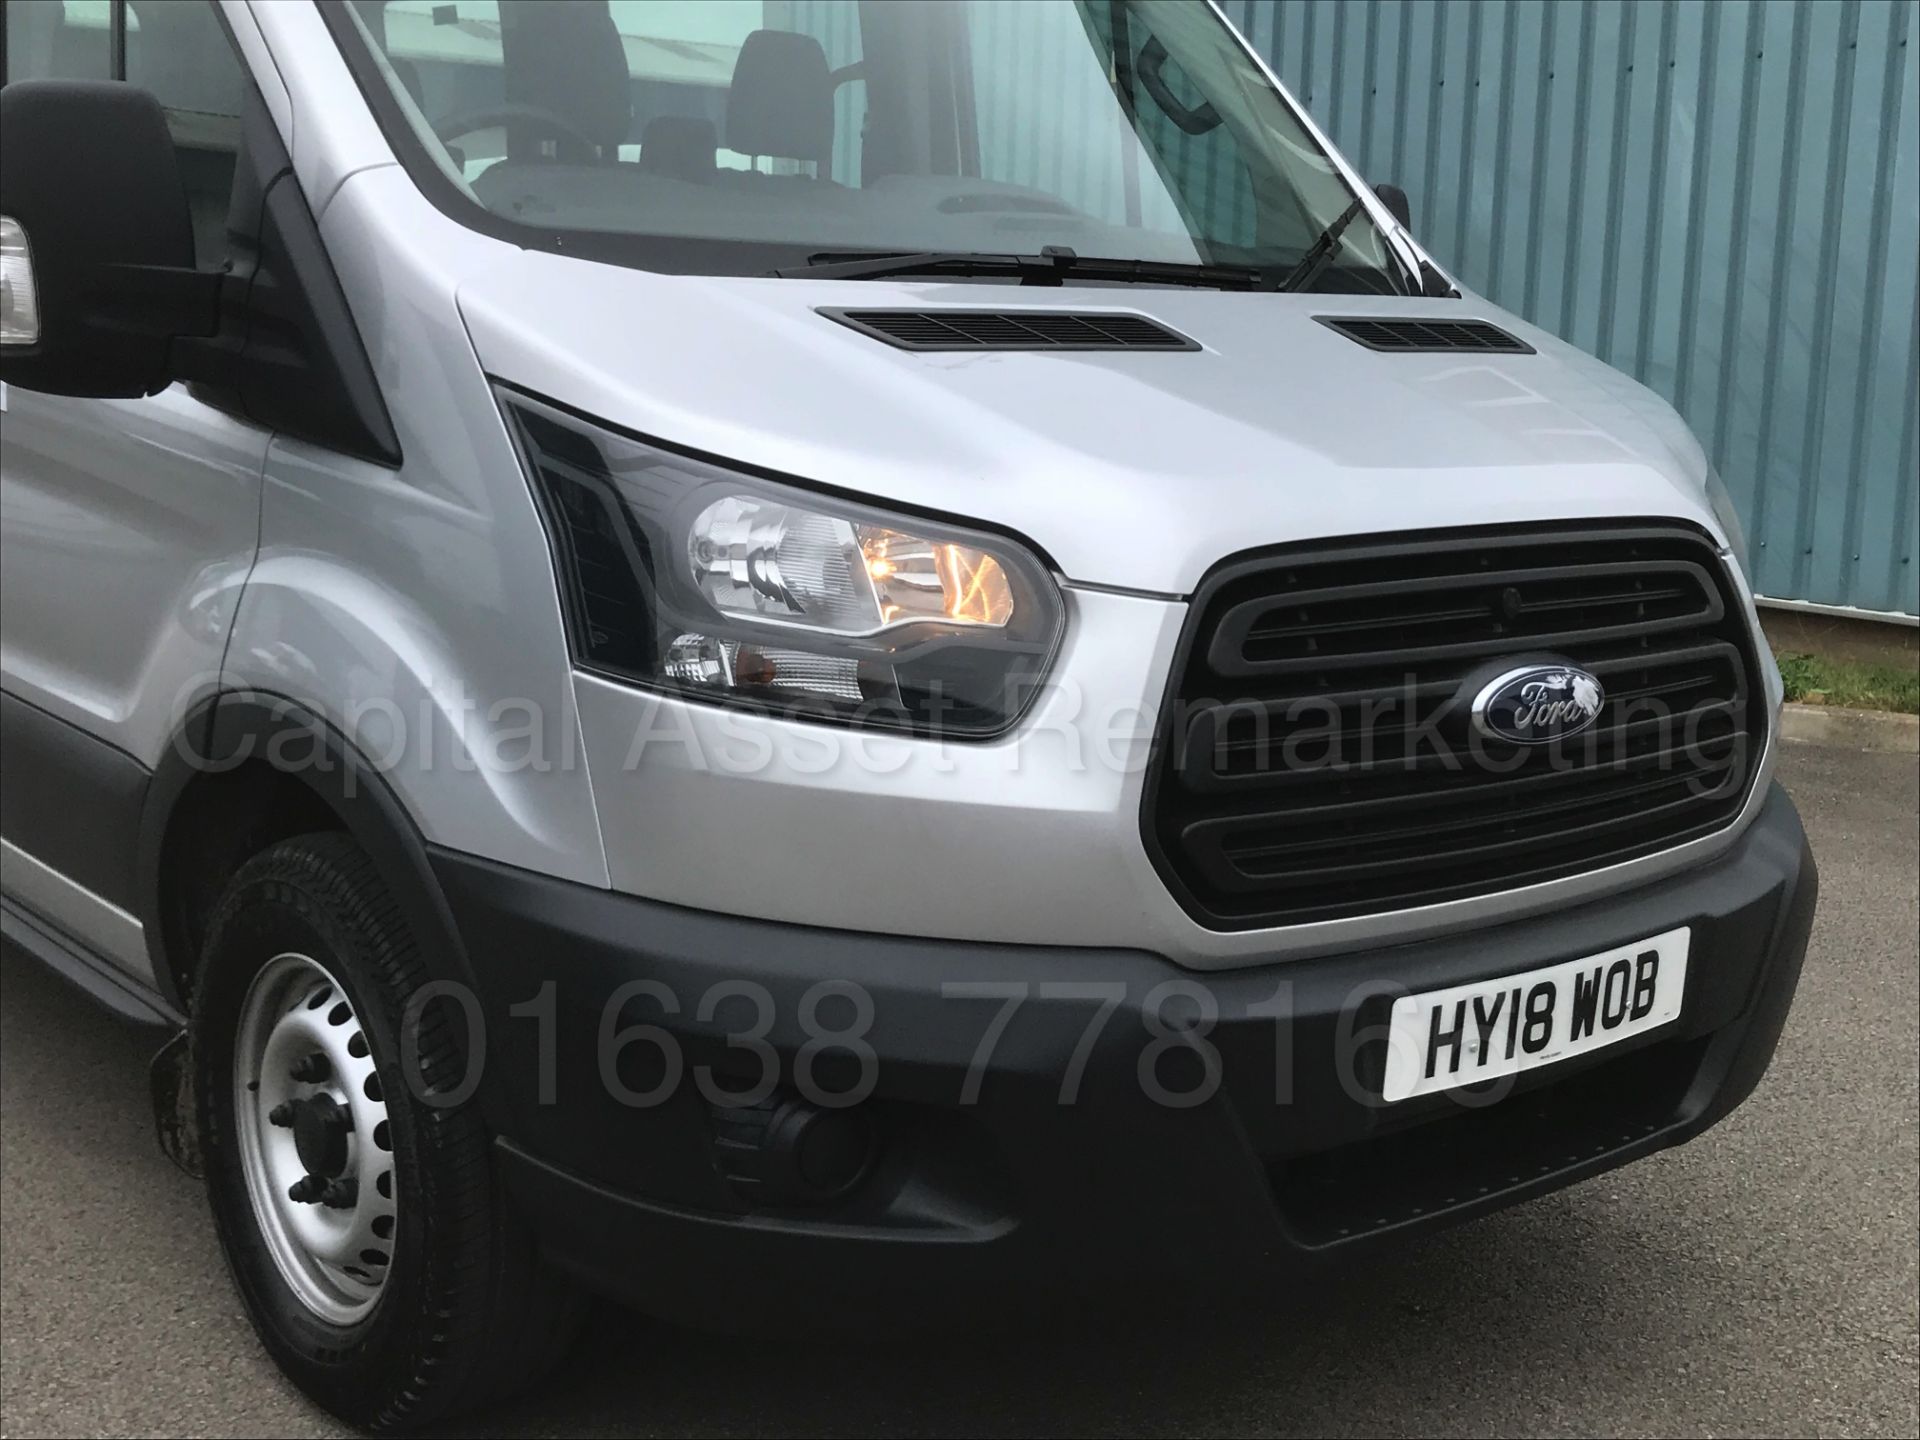 (On Sale) FORD TRANSIT LWB '15 SEATER MINI-BUS' (2018) '2.2 TDCI -125 BHP- 6 SPEED' 130 MILES ONLY ! - Image 19 of 50